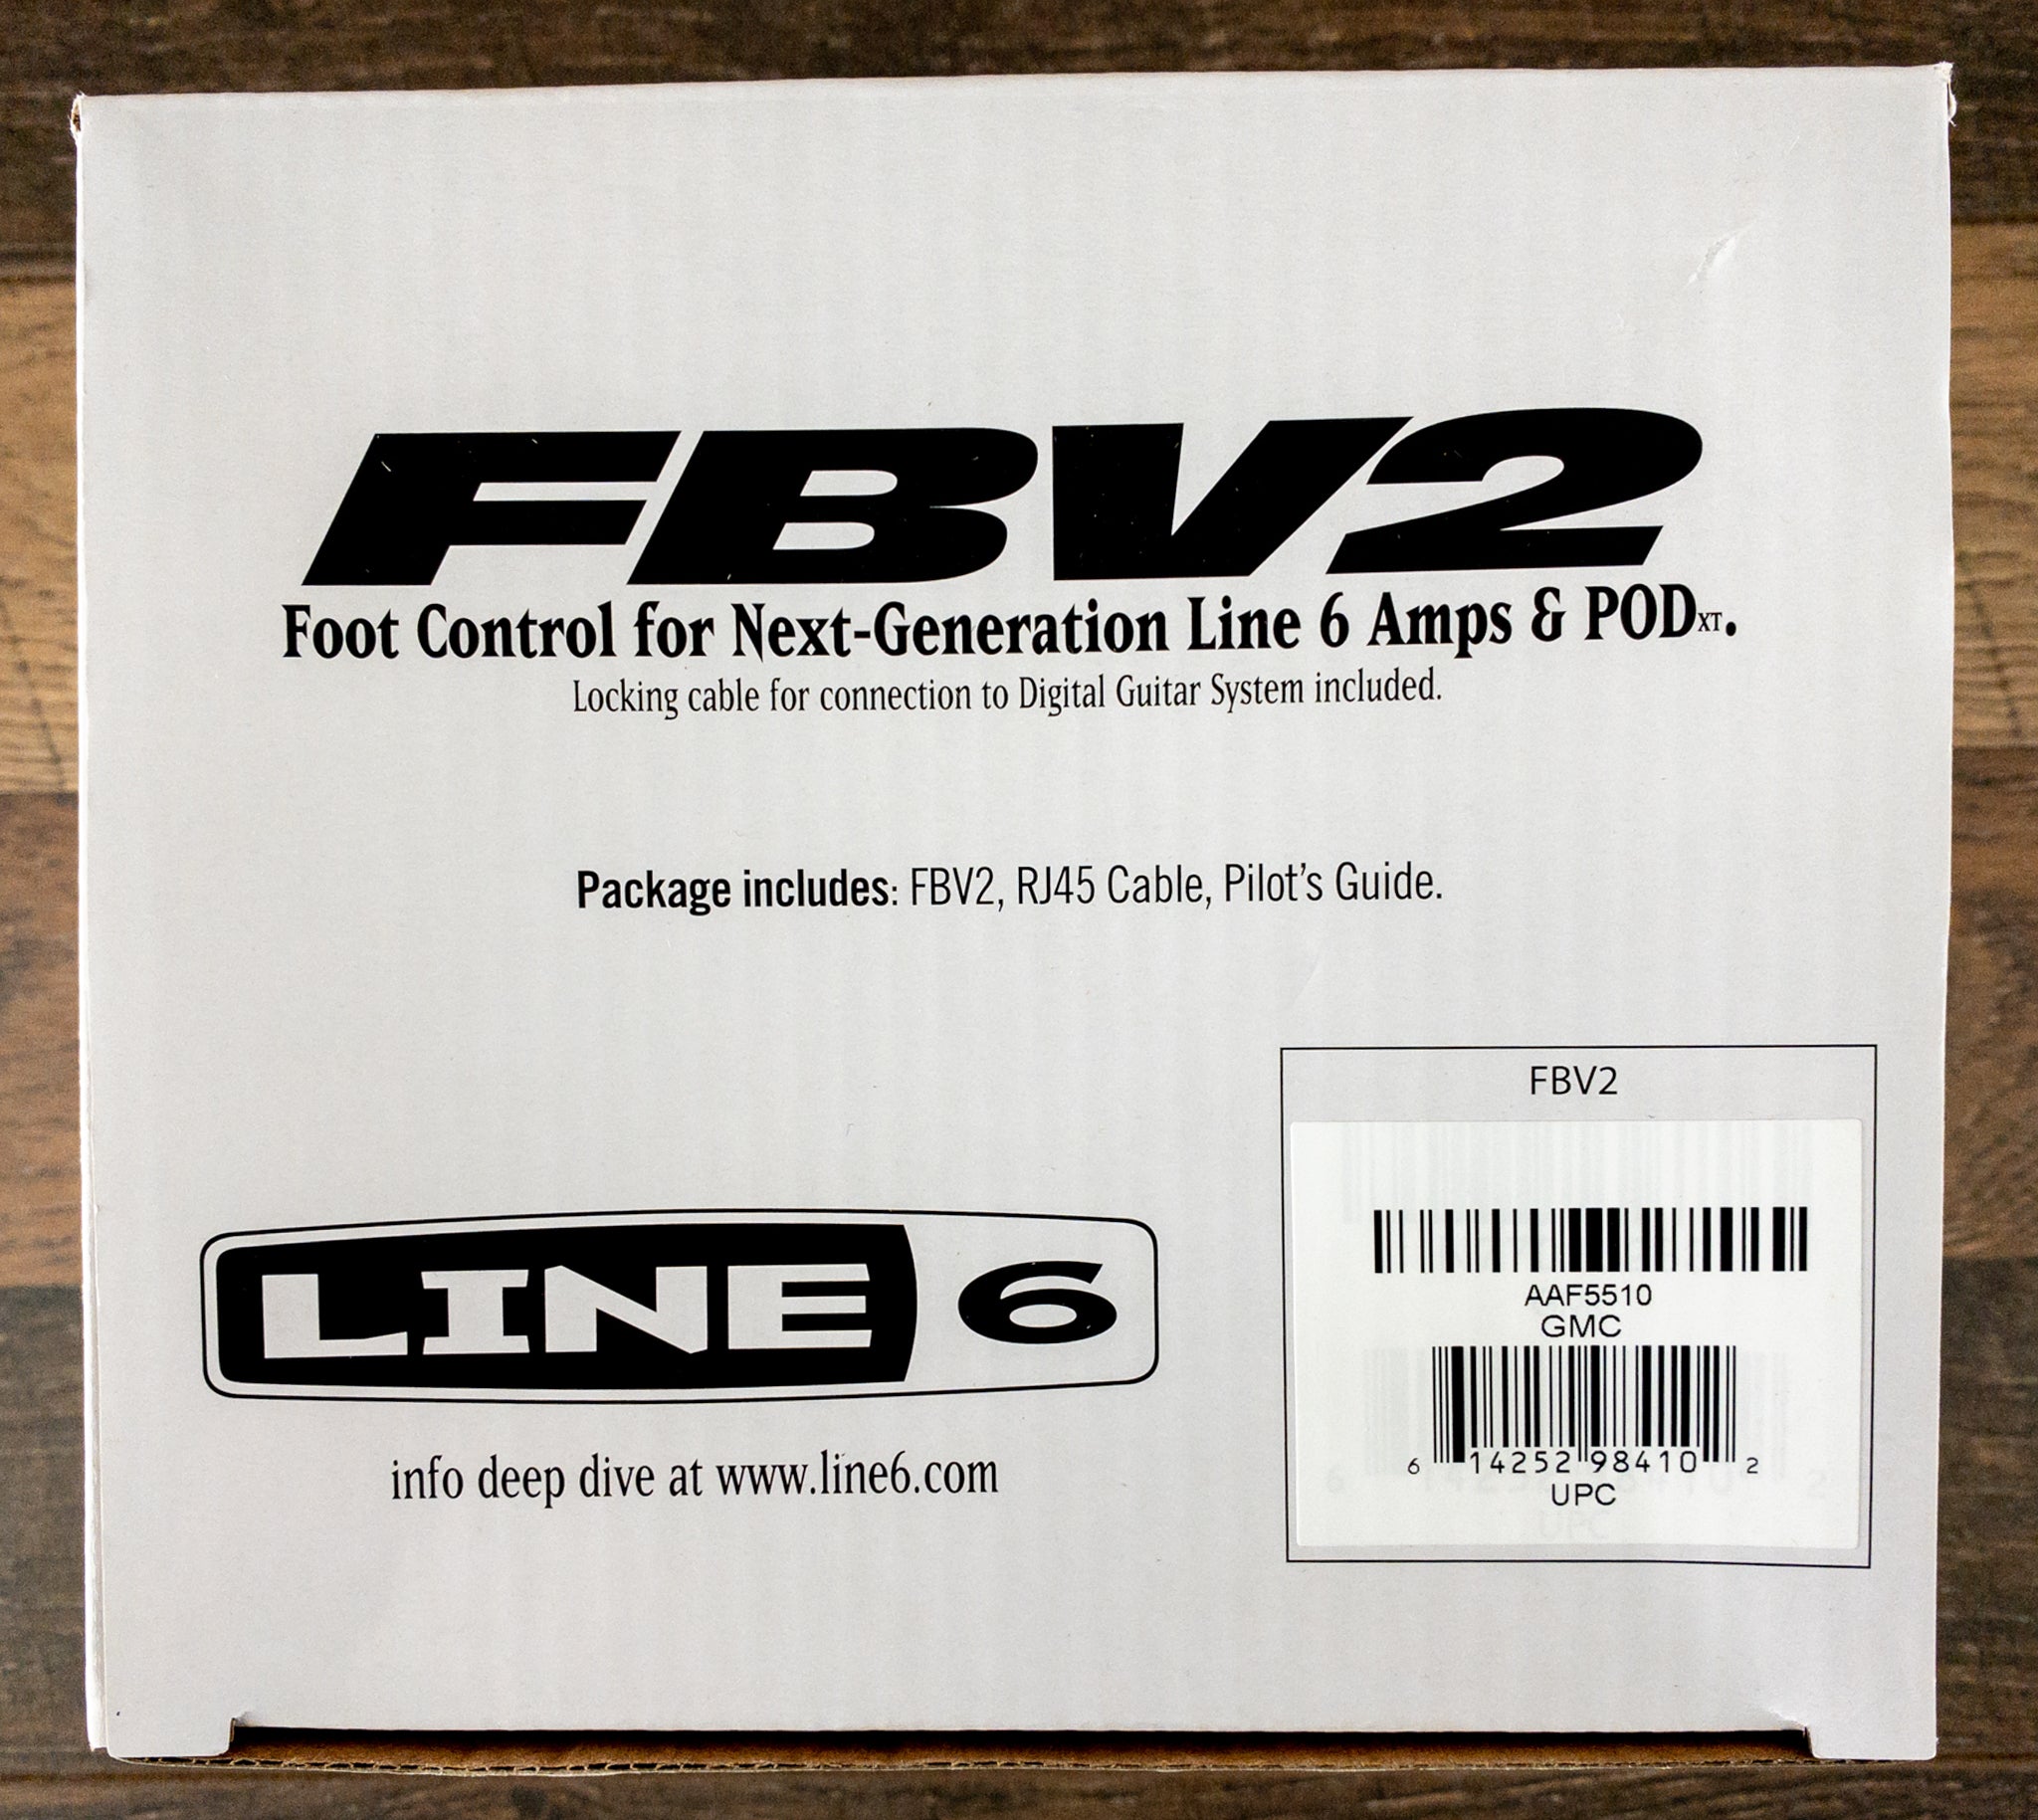 Line 6 FBV2 Foot Control for Next-Generation Line 6 Amps & POD with RJ45 Cable